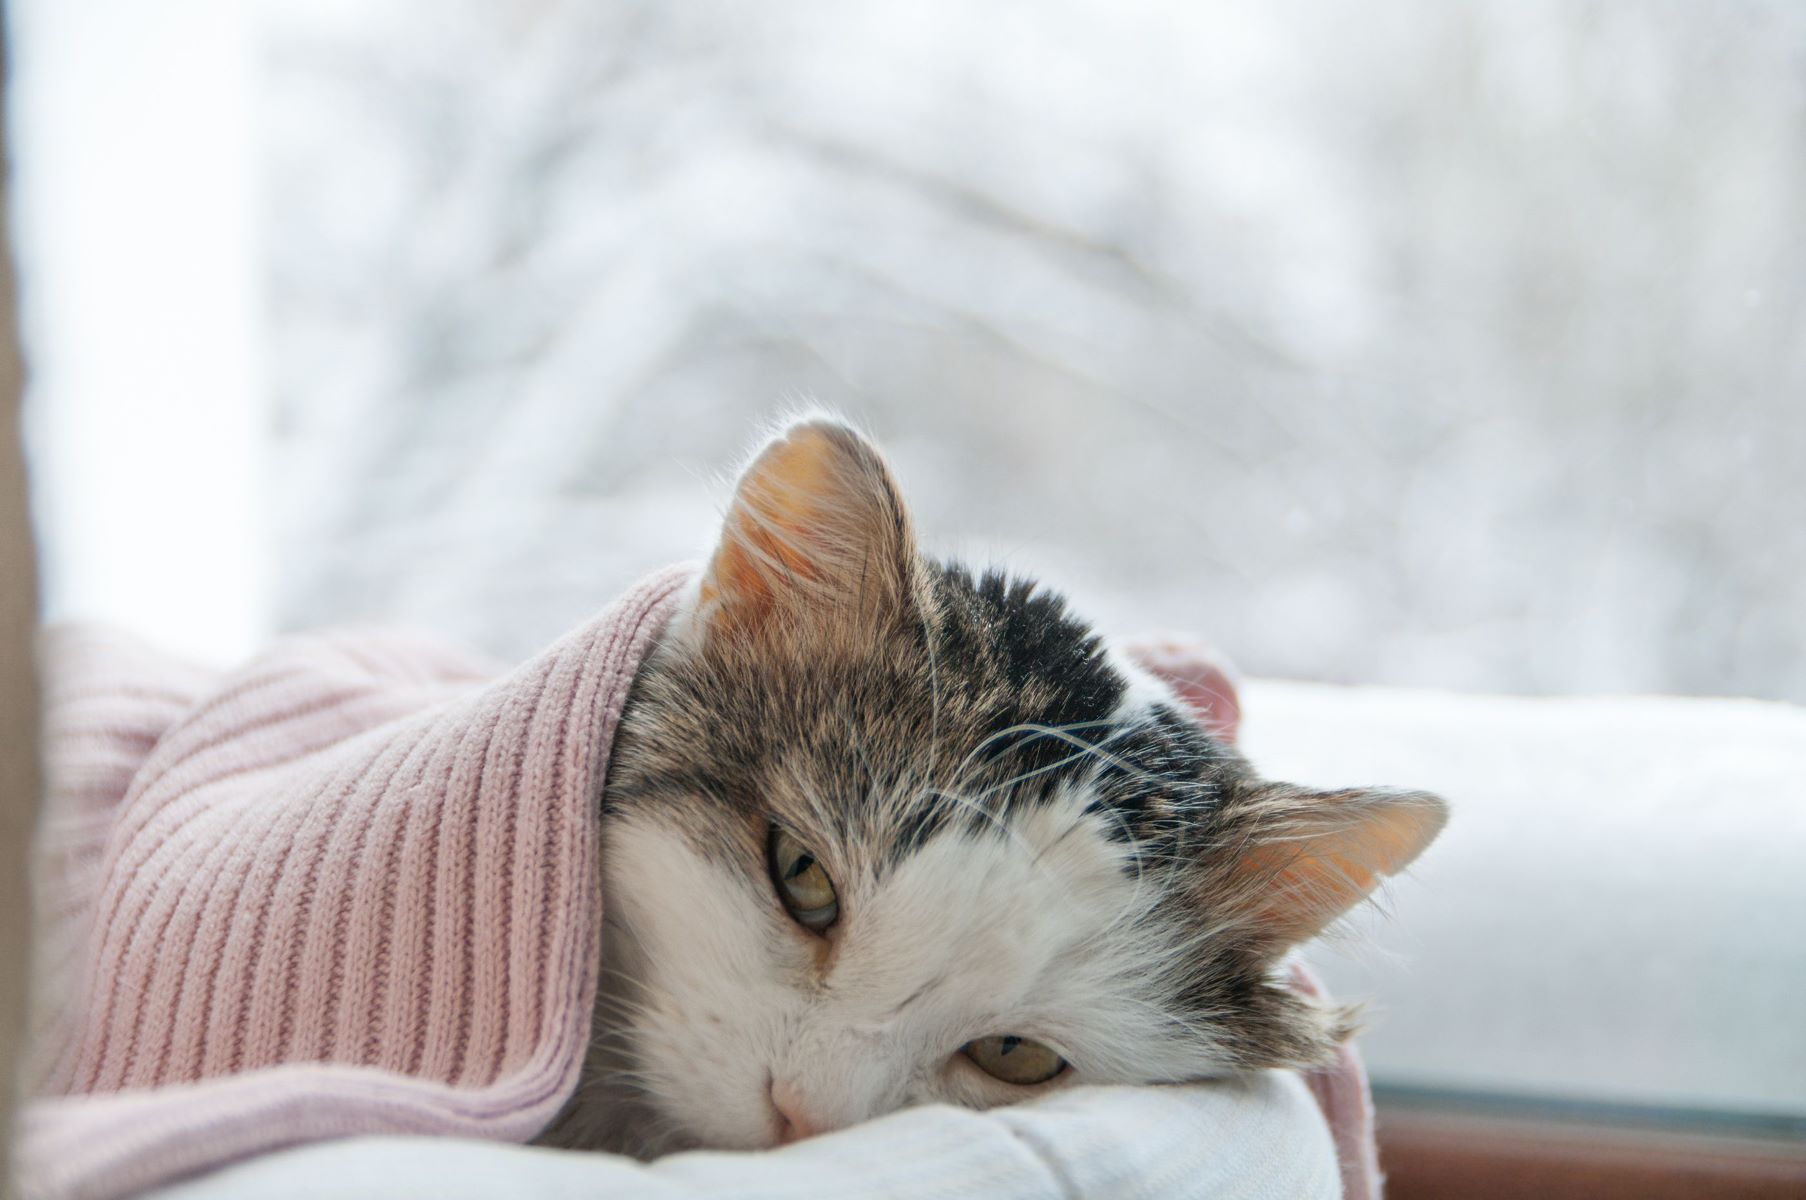 Home Remedies For Your Cat's Cold: No Vet Visit Needed!